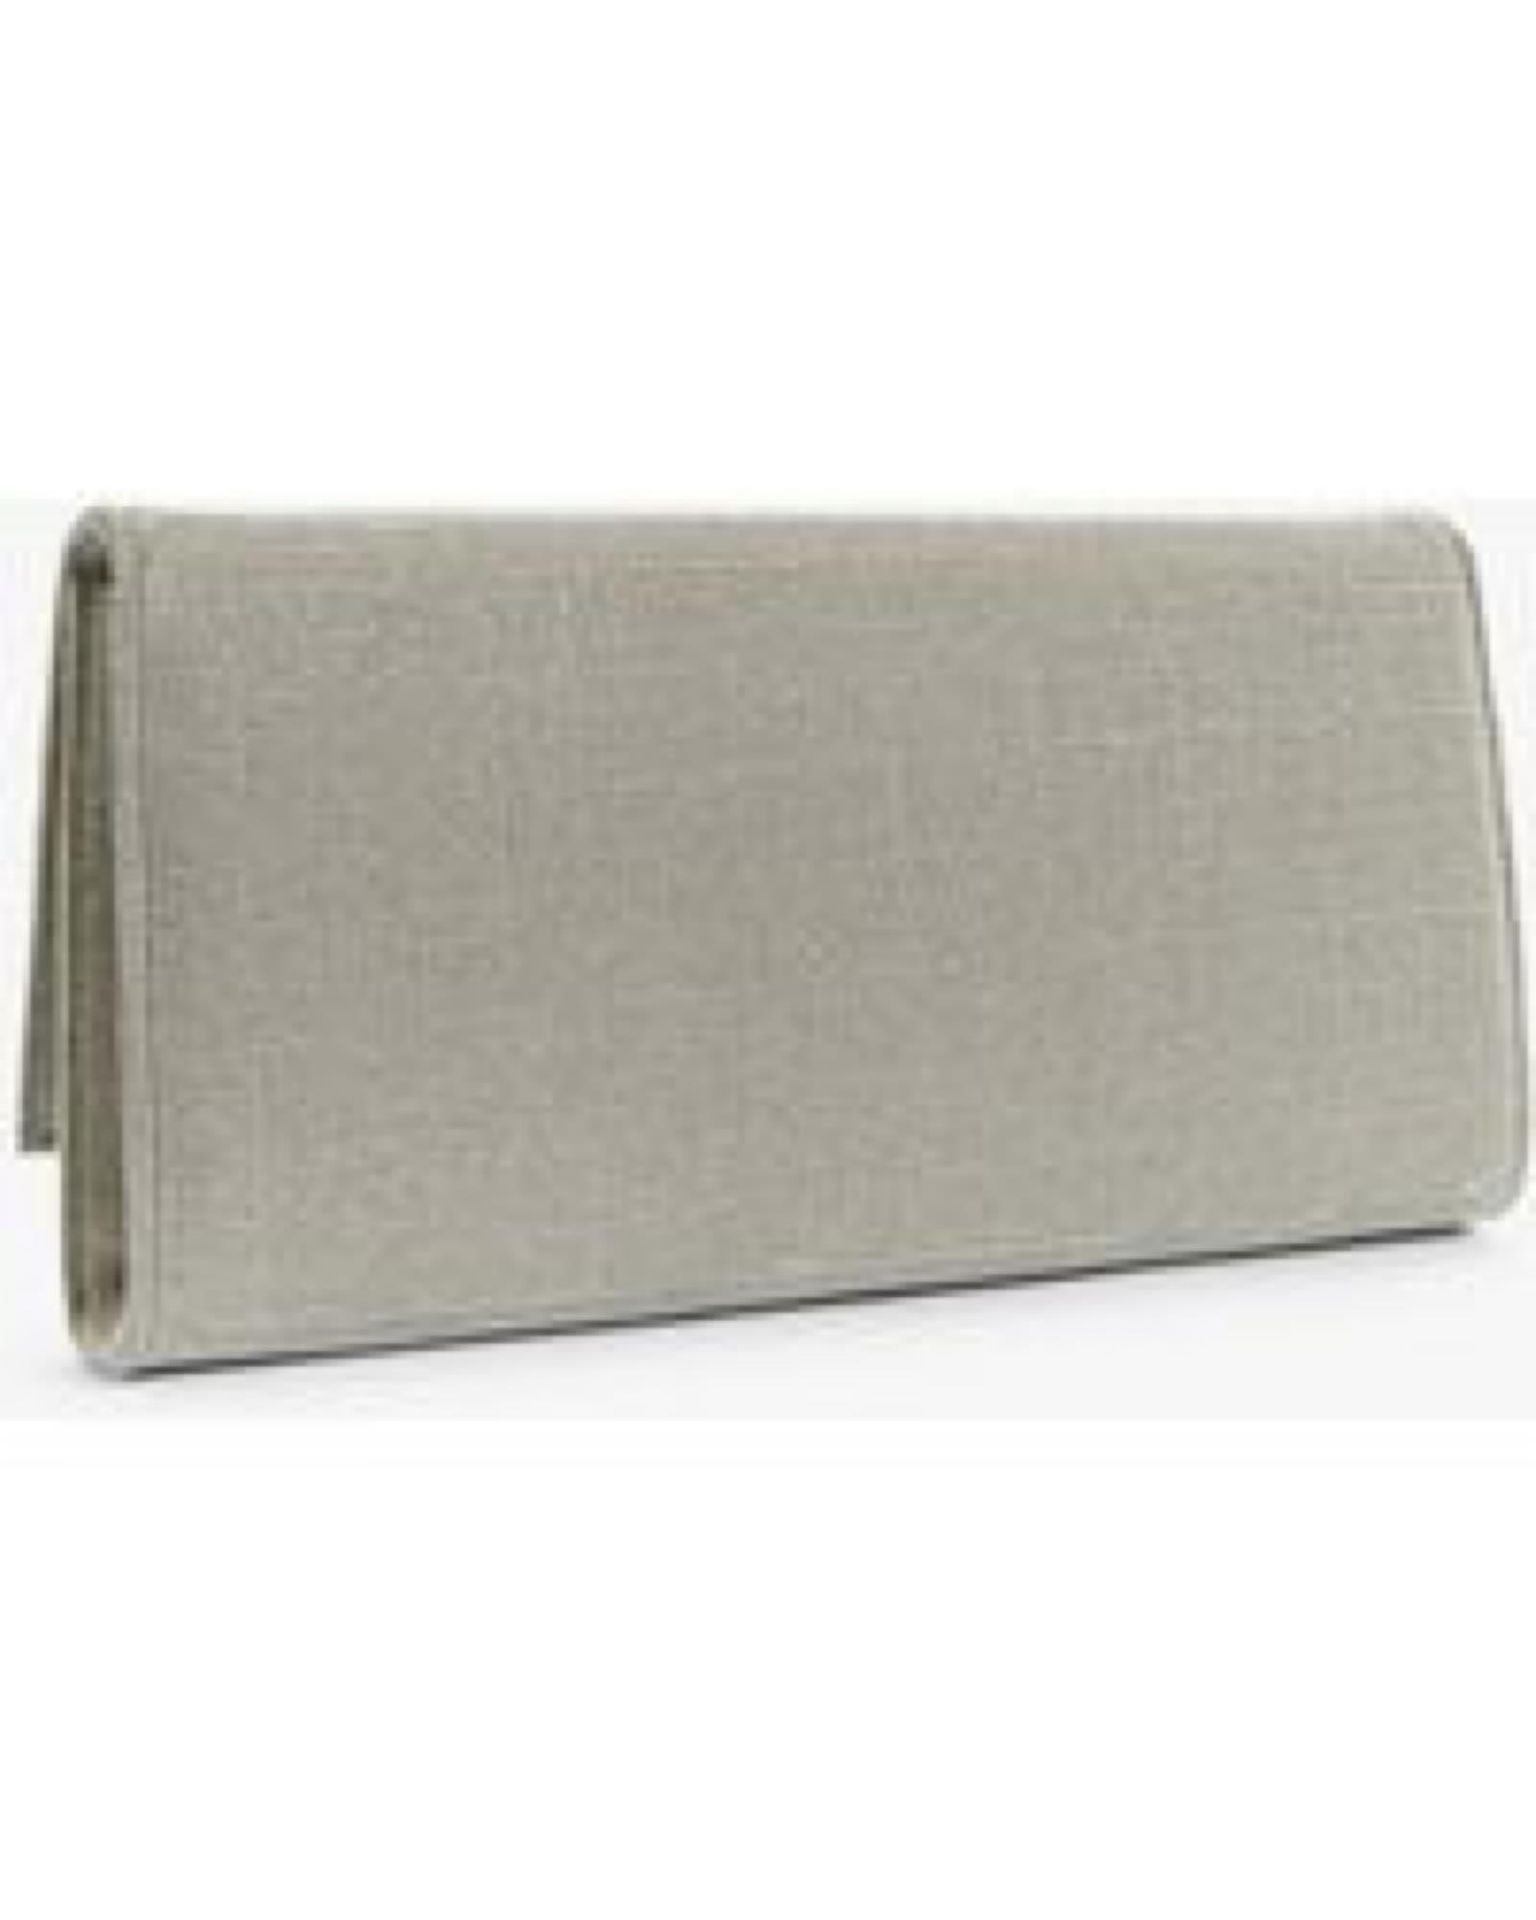 (Jb) RRP £150 Lot To Contain 1 Brand New Boxed Peter Kaiser Hesa Clutch Bag In Sand Shimmer (67.085)